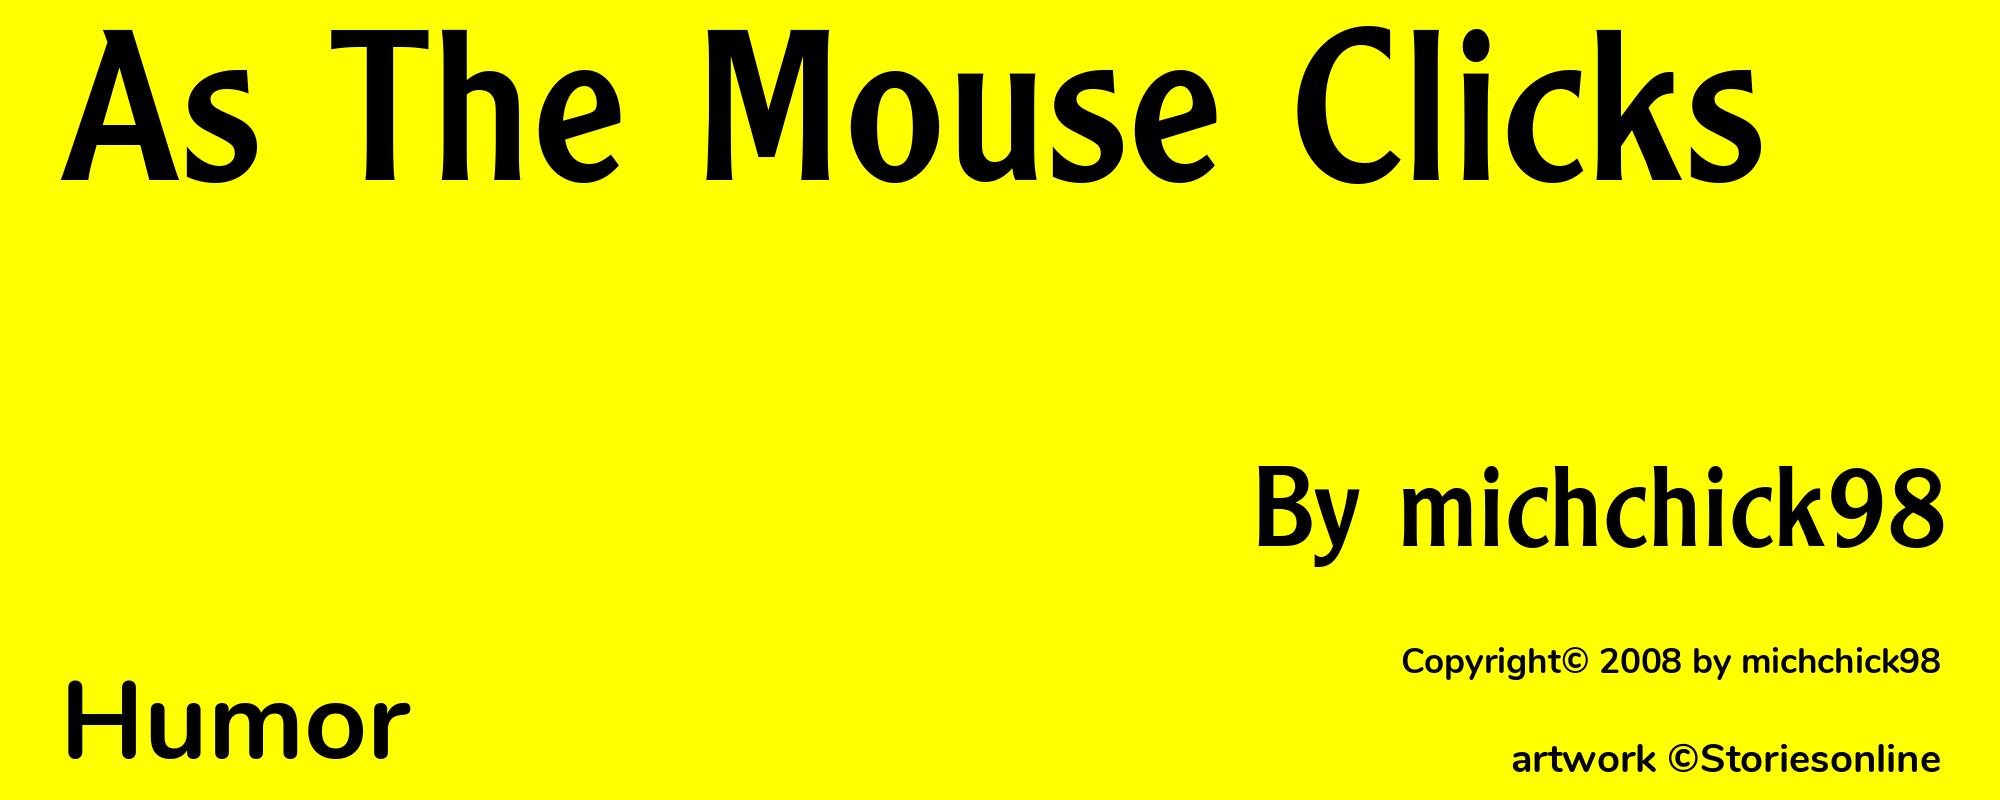 As The Mouse Clicks - Cover